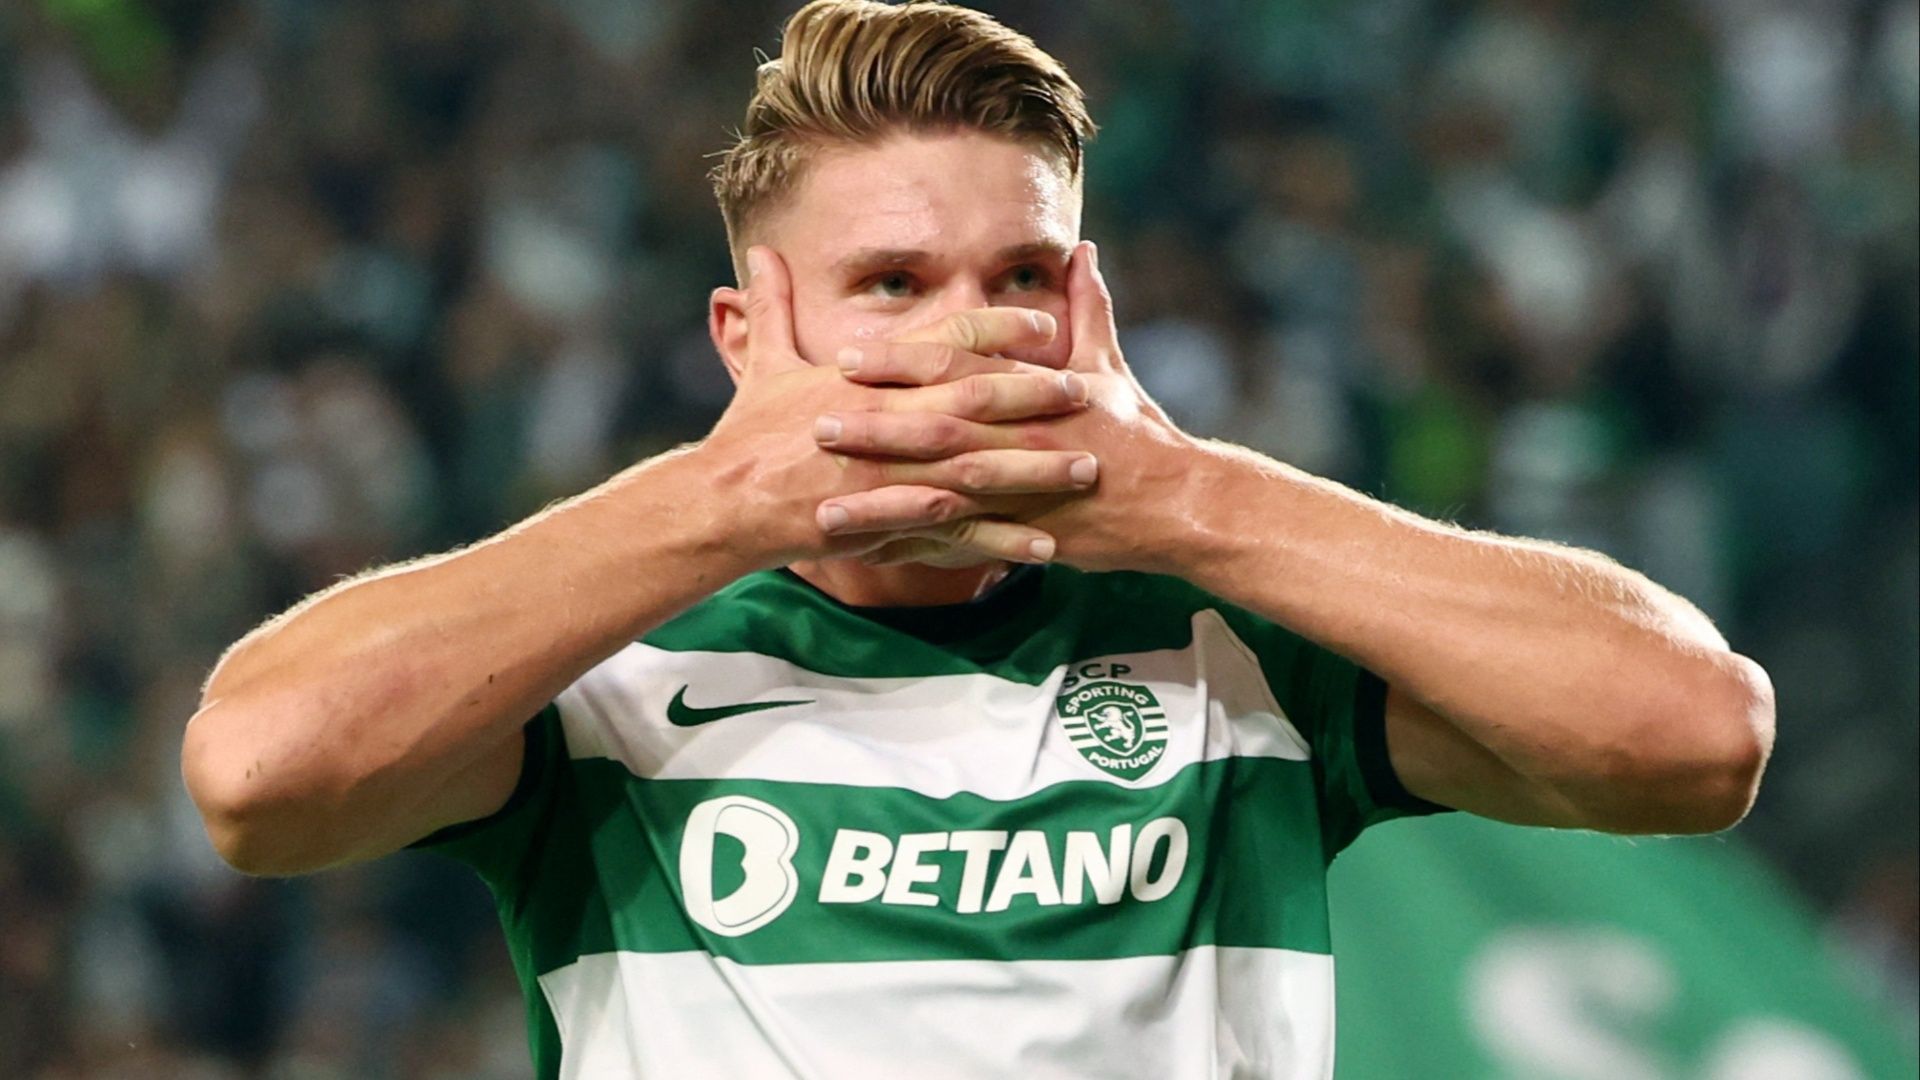  Viktor Gyokeres, a Swedish professional footballer who plays as a striker for Primeira Liga club Sporting CP, celebrates a goal with his hands covering his mouth.